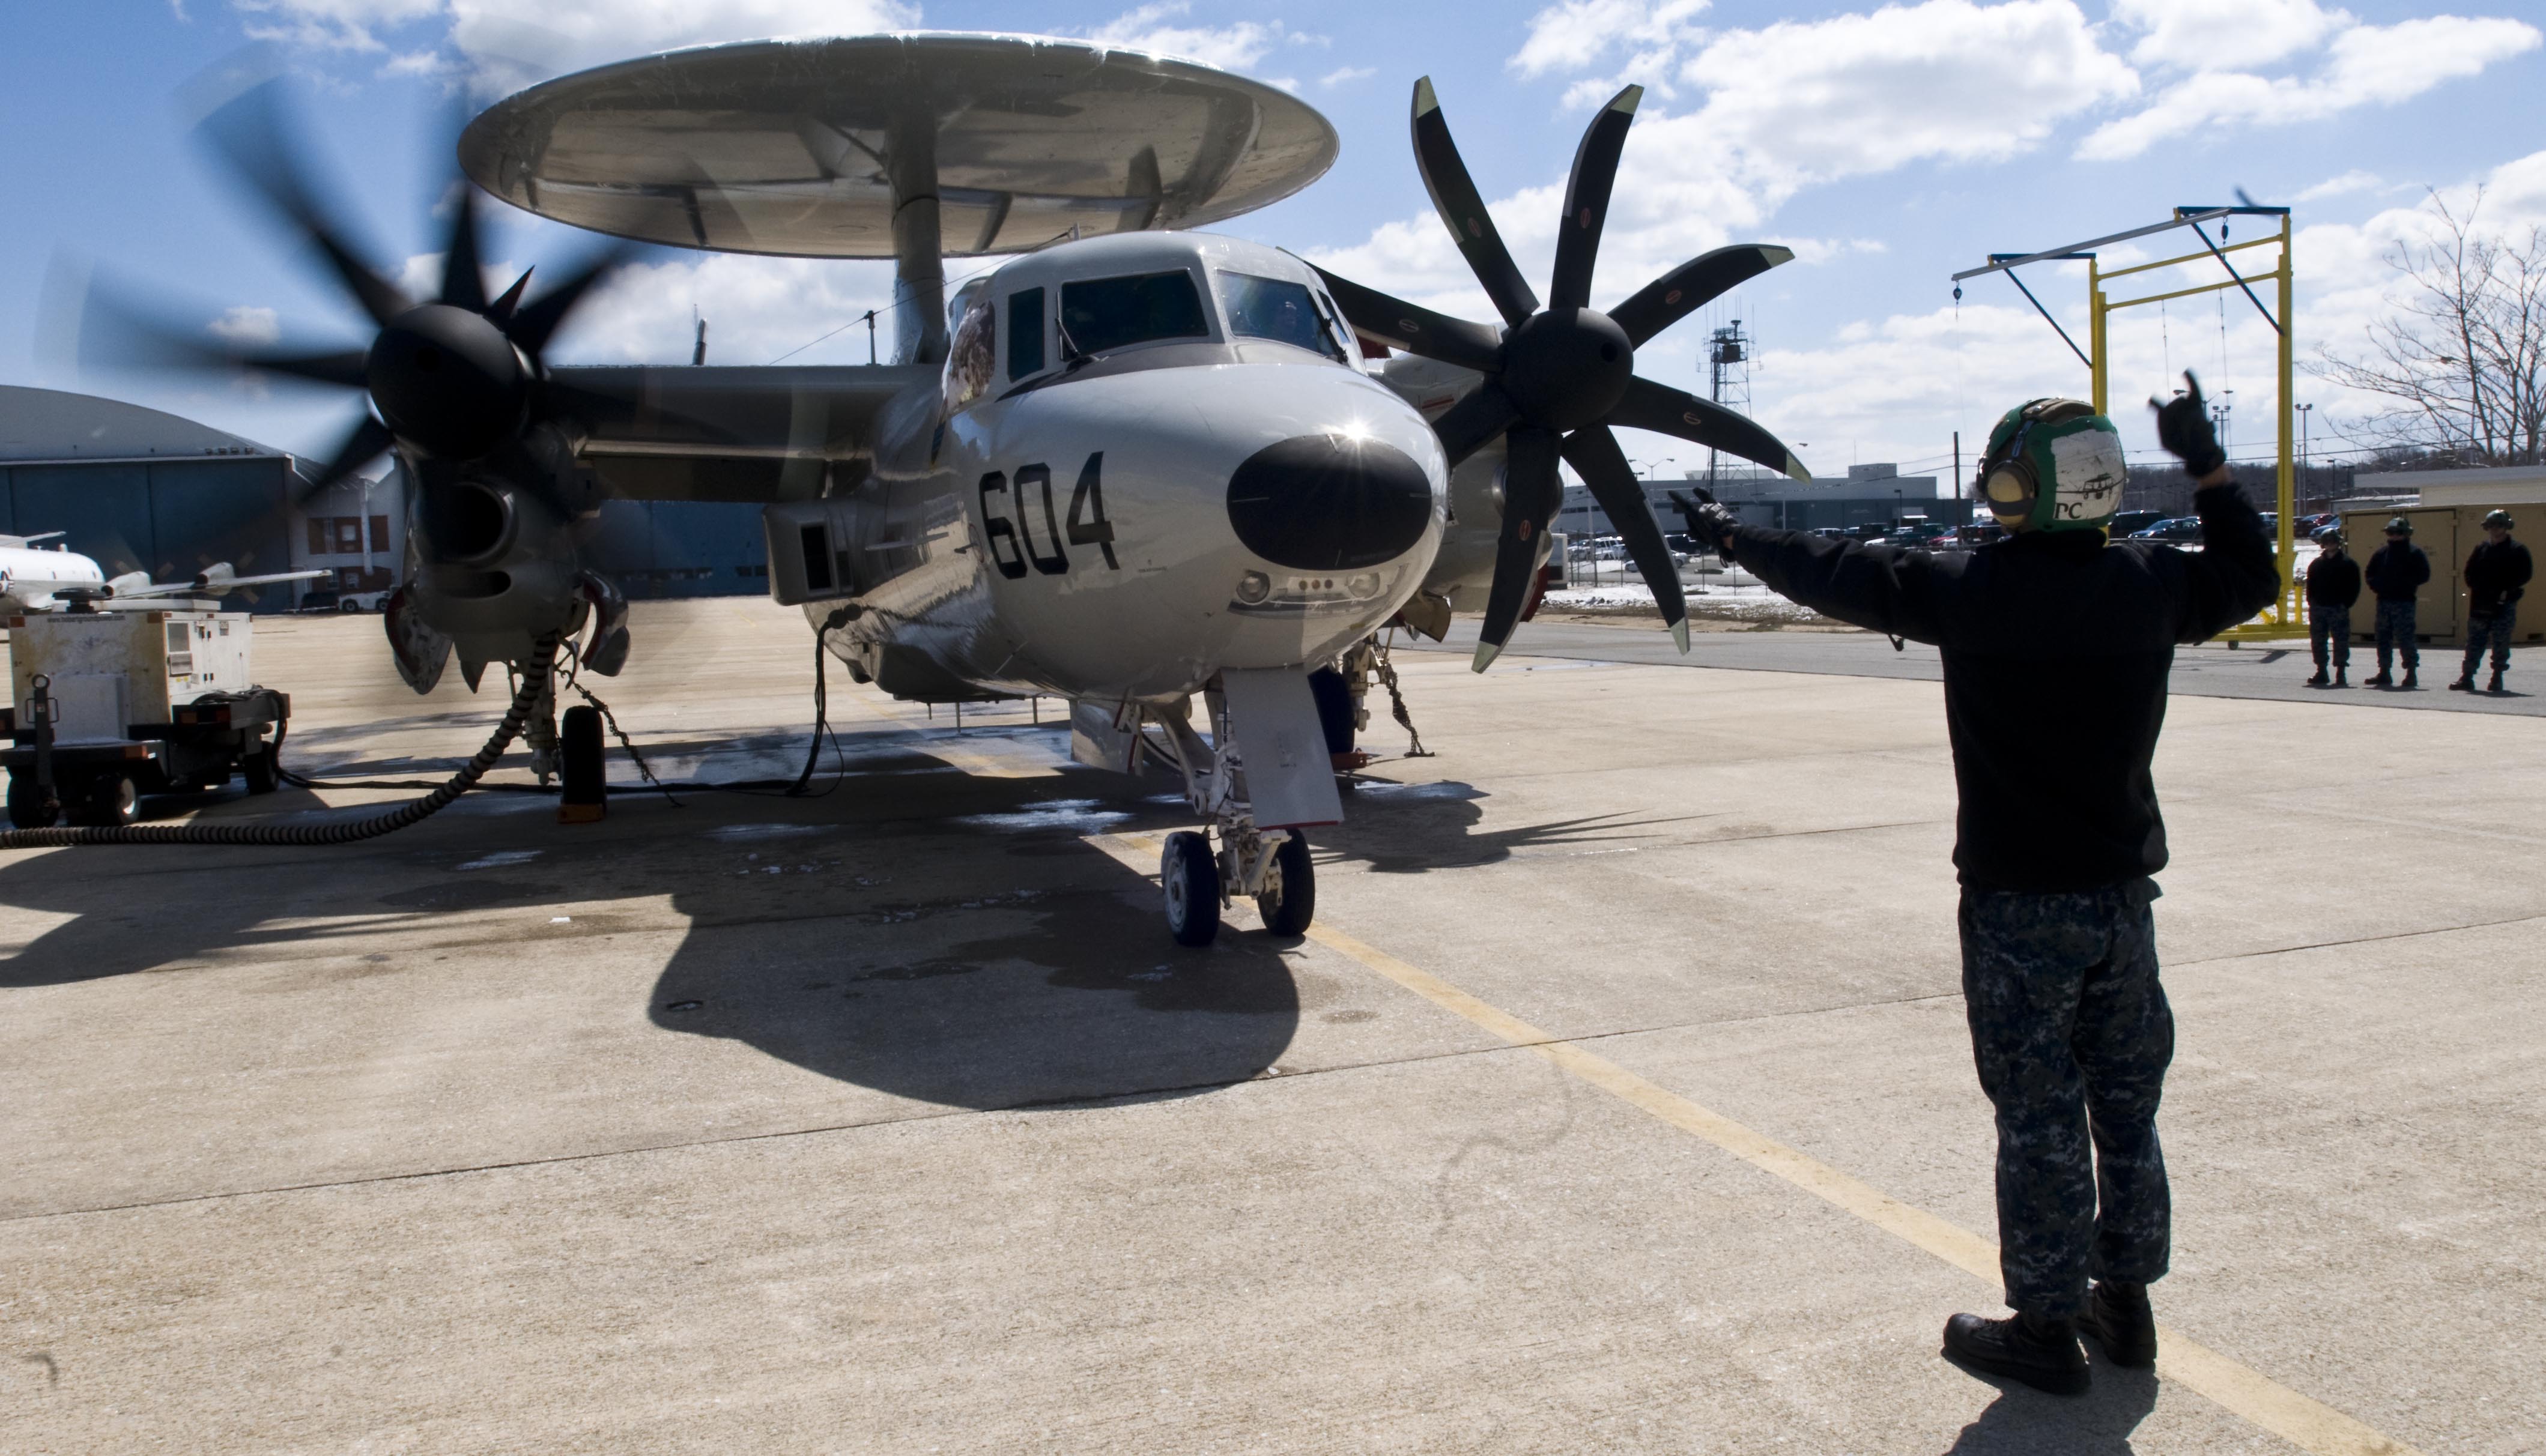 An E-2D Hawkeye outside the hangar at Naval Air Station Patuxent River on March 26, 2014. US NAvy Photo